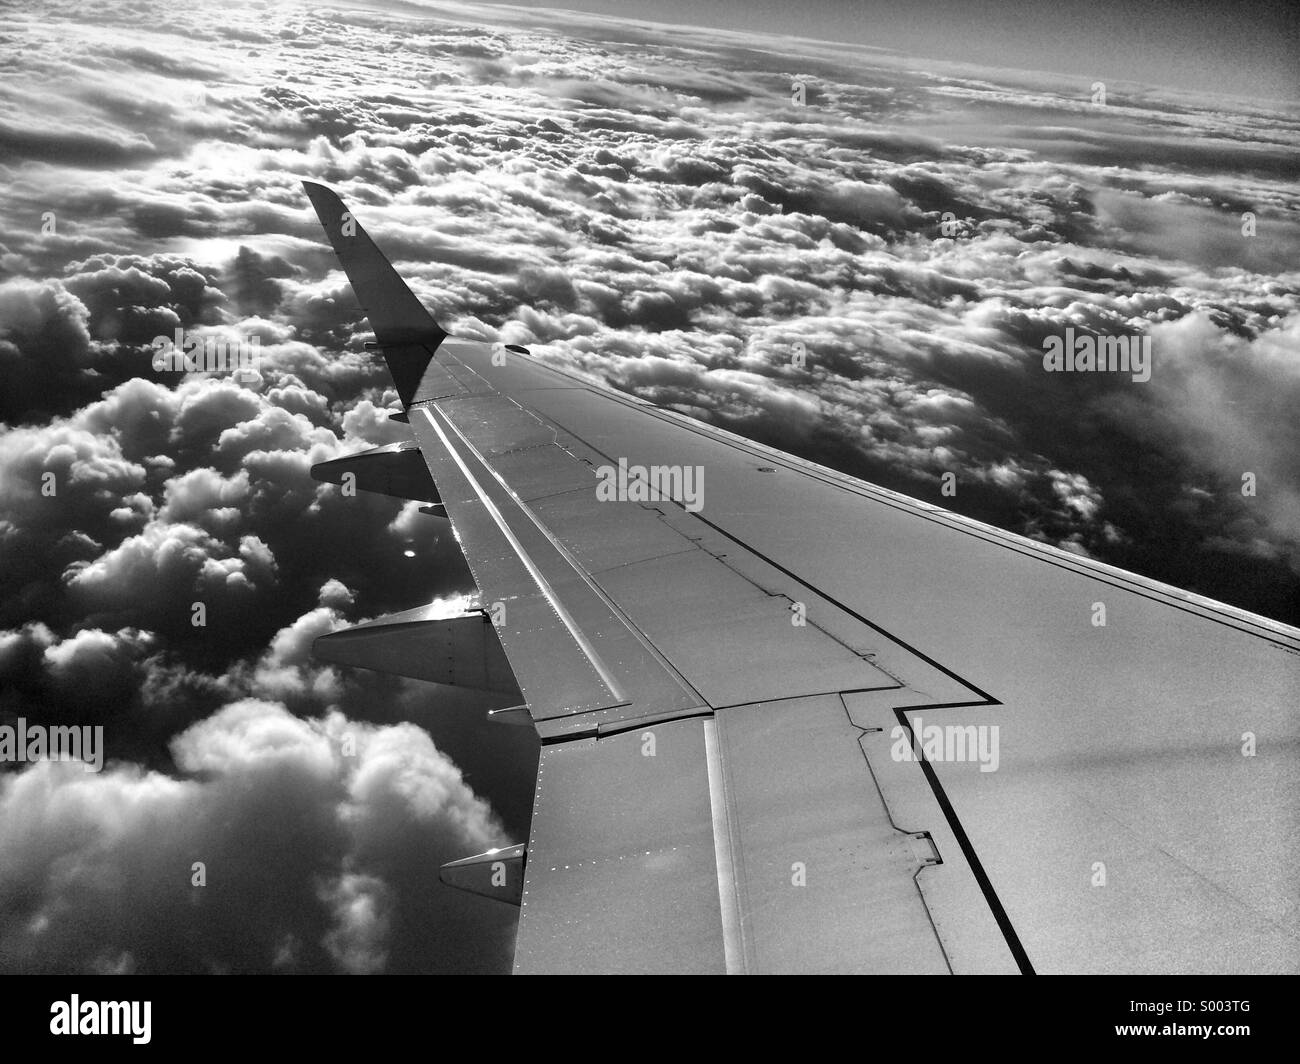 The wing of an aircraft above a cloudy sky. Stock Photo